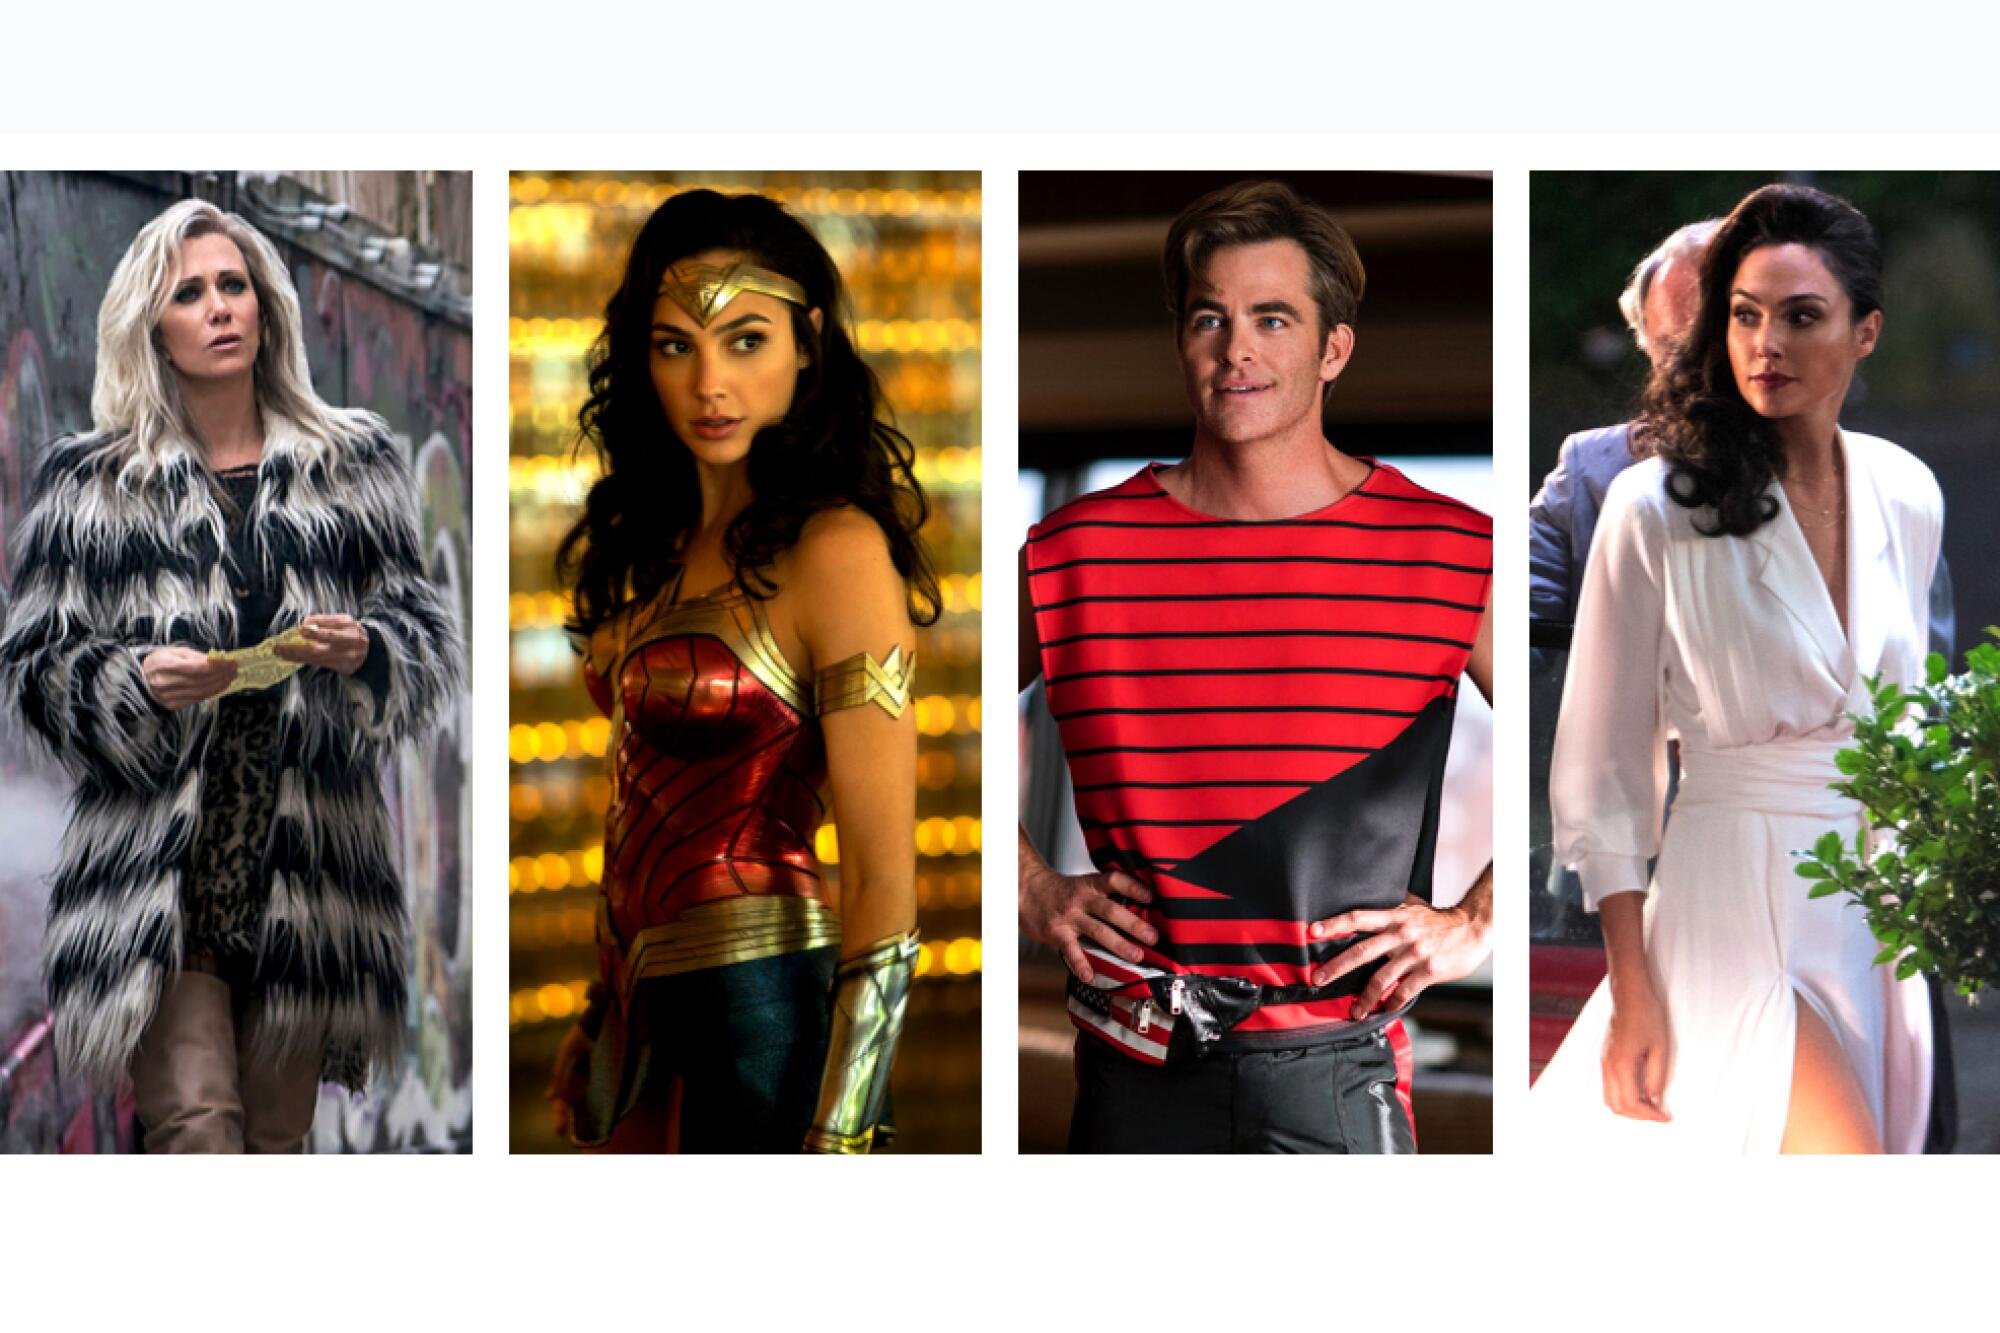 Costumes from "Wonder Woman 1984" with Kirsten Wiig, Gal Gadot, and Chris Pine.